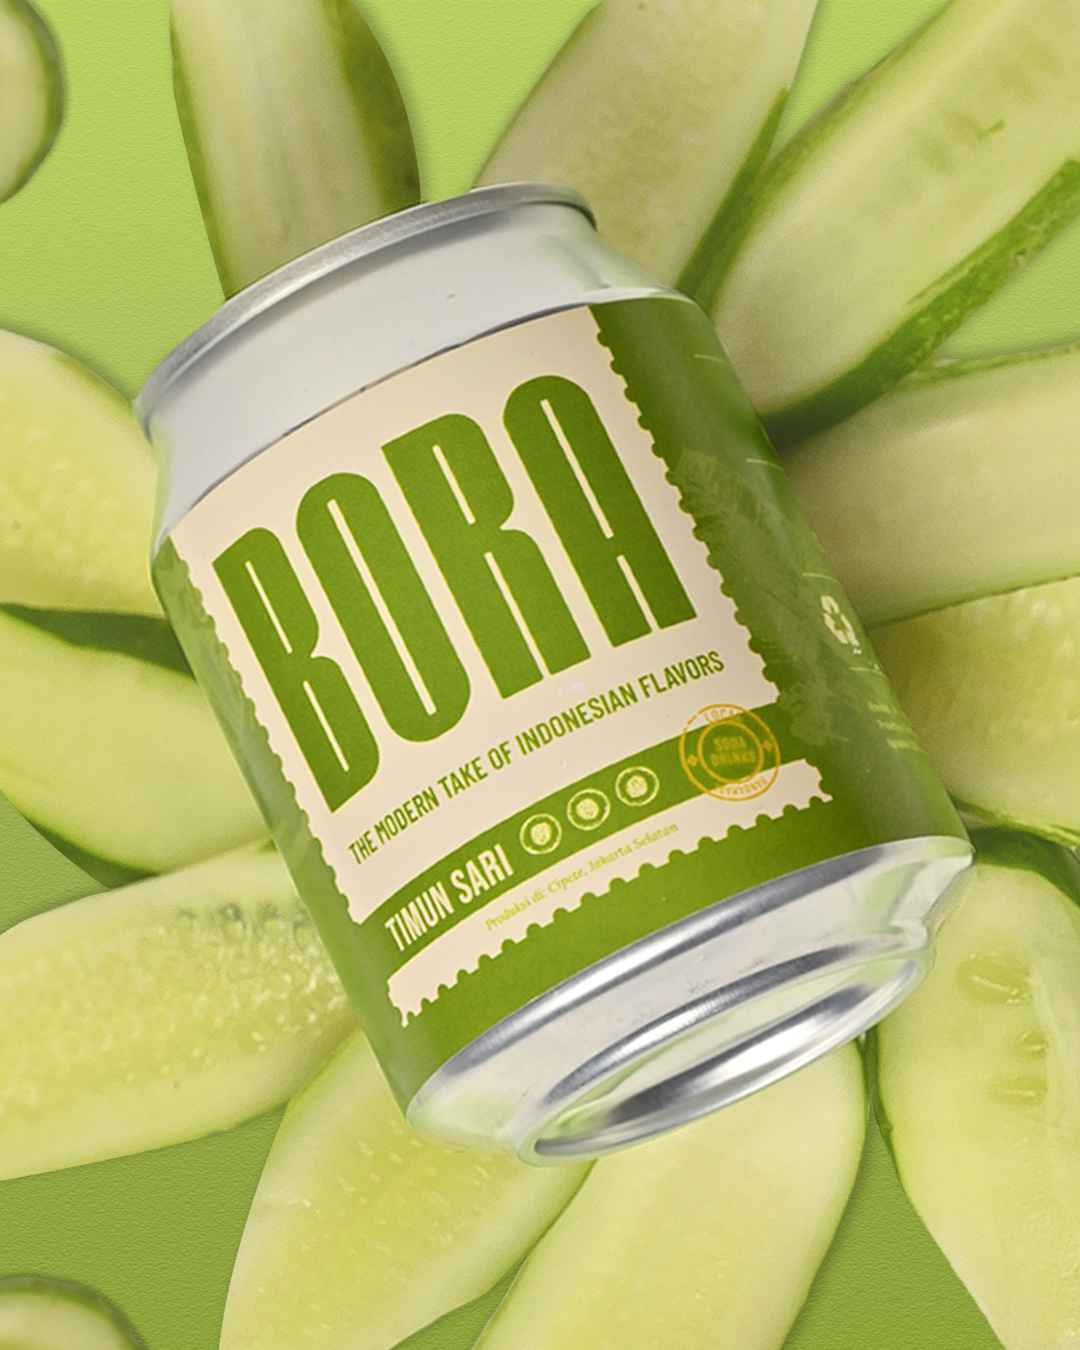 BORA Soda Offers Exciting Local Flavors